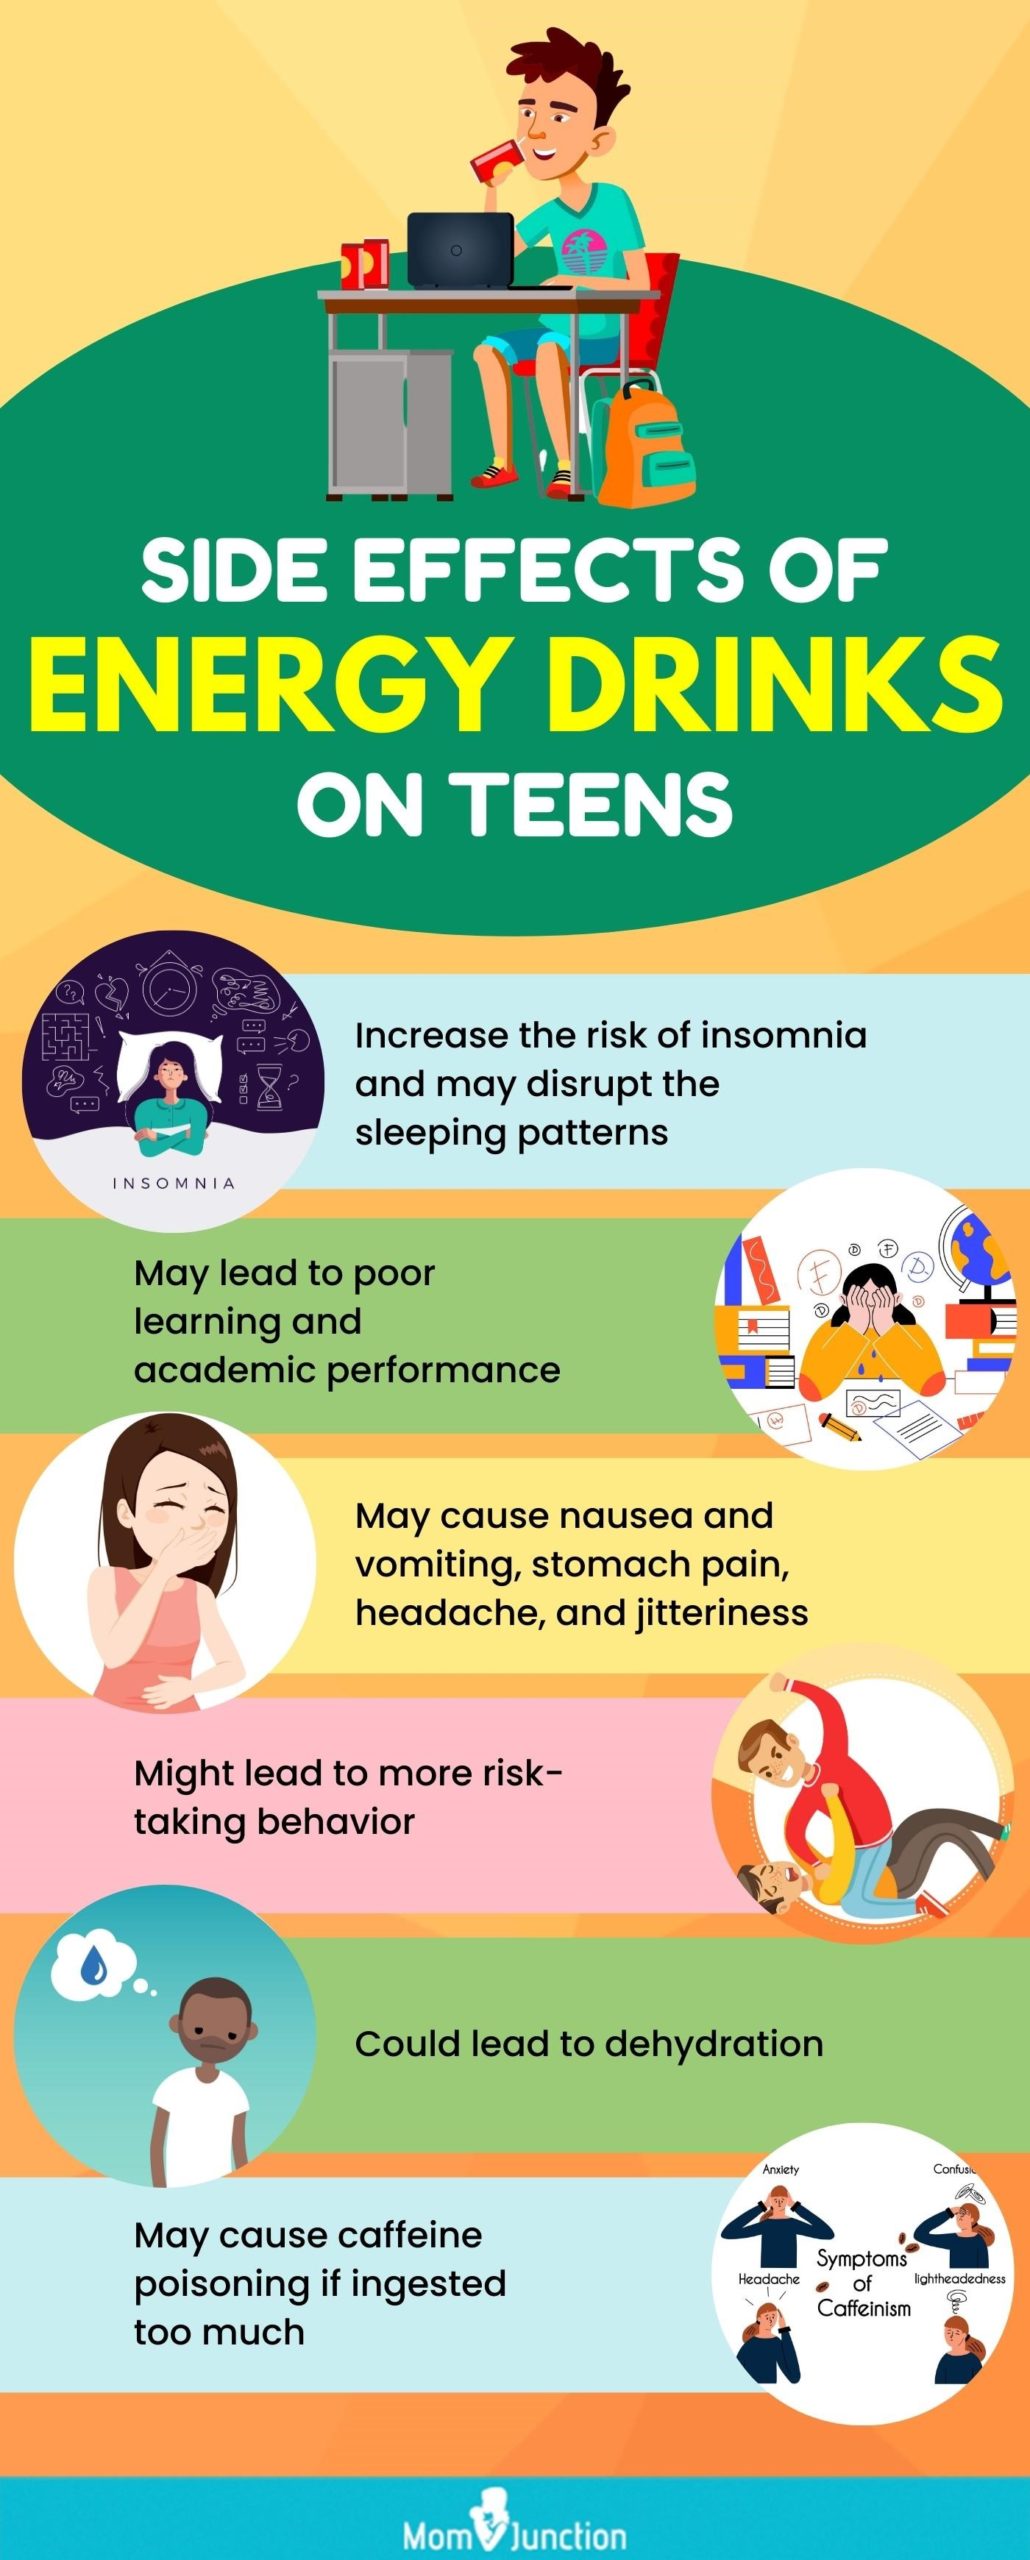 Diet For Teenage Girls: 9 Easy Tips And 2 Simple Diet Plans